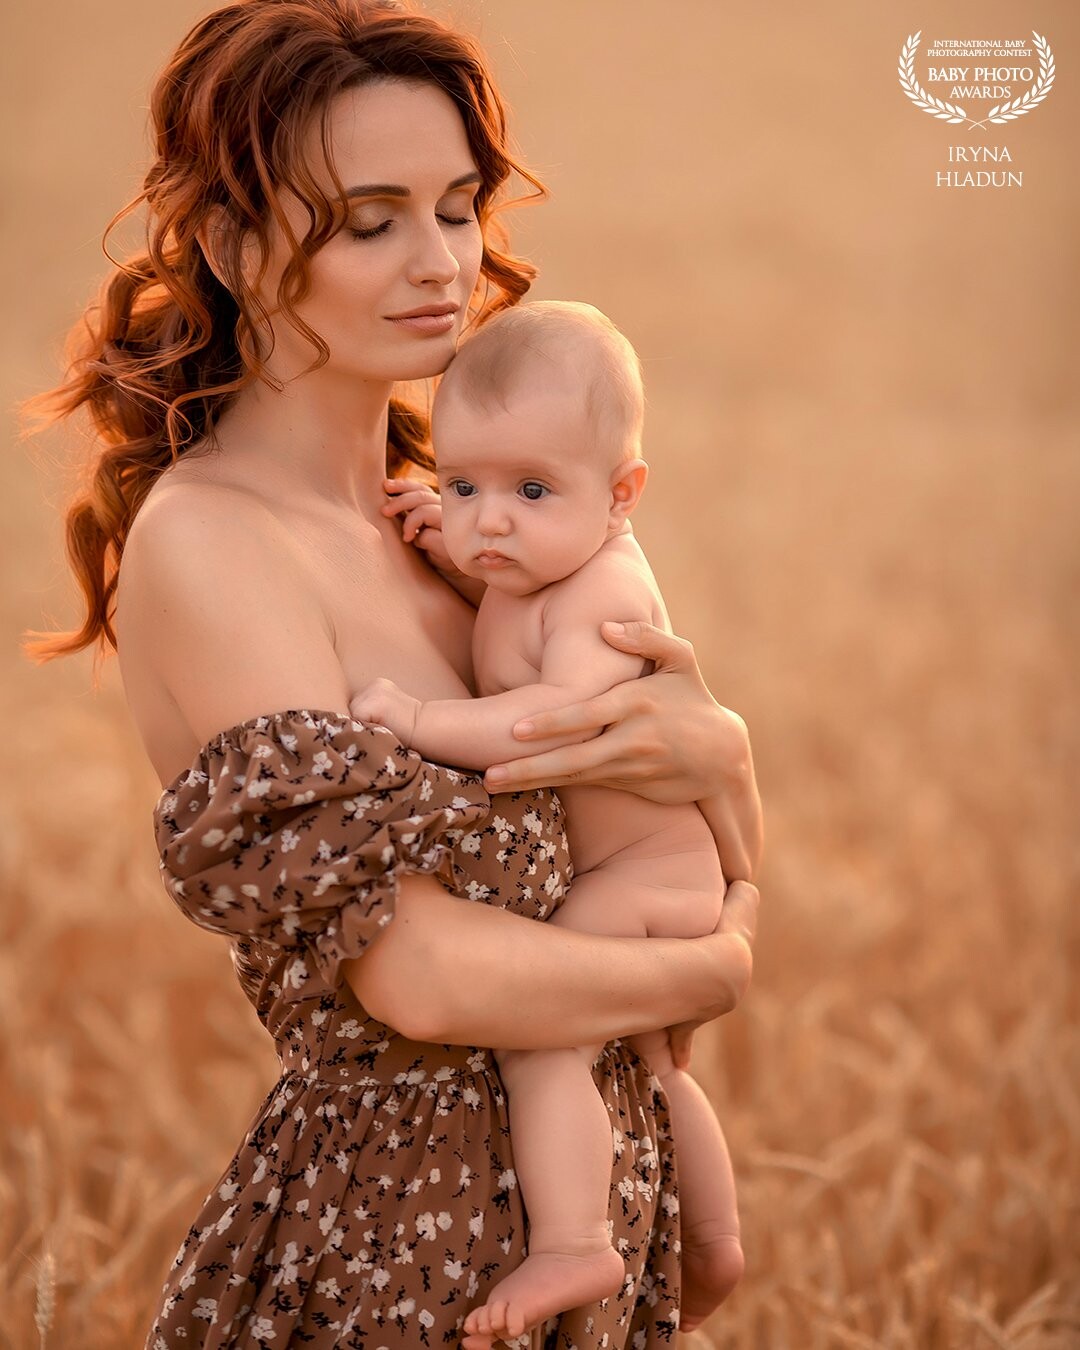 Sensual love story of a mother for her baby. Filmed in a wheat field in the rays of the setting sun. Mom hugs the baby and protects him from all the hardships of this world. With this photo I wanted to show all the power of mother's love.